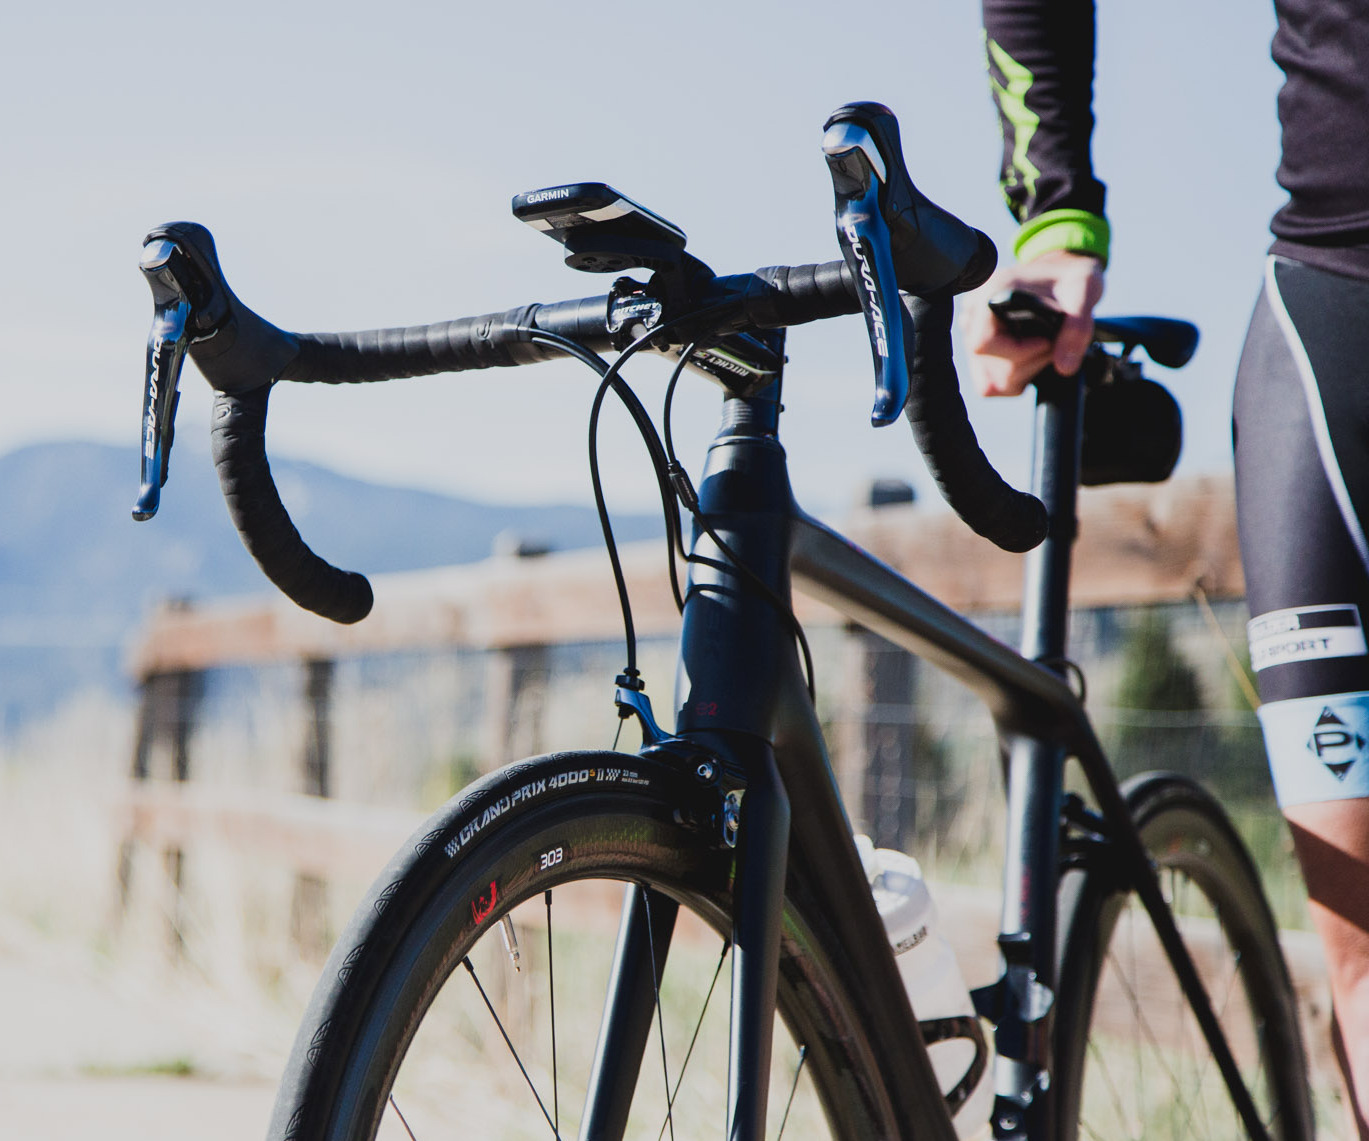 Finance your new ride today! Scottsdale Bike Shop